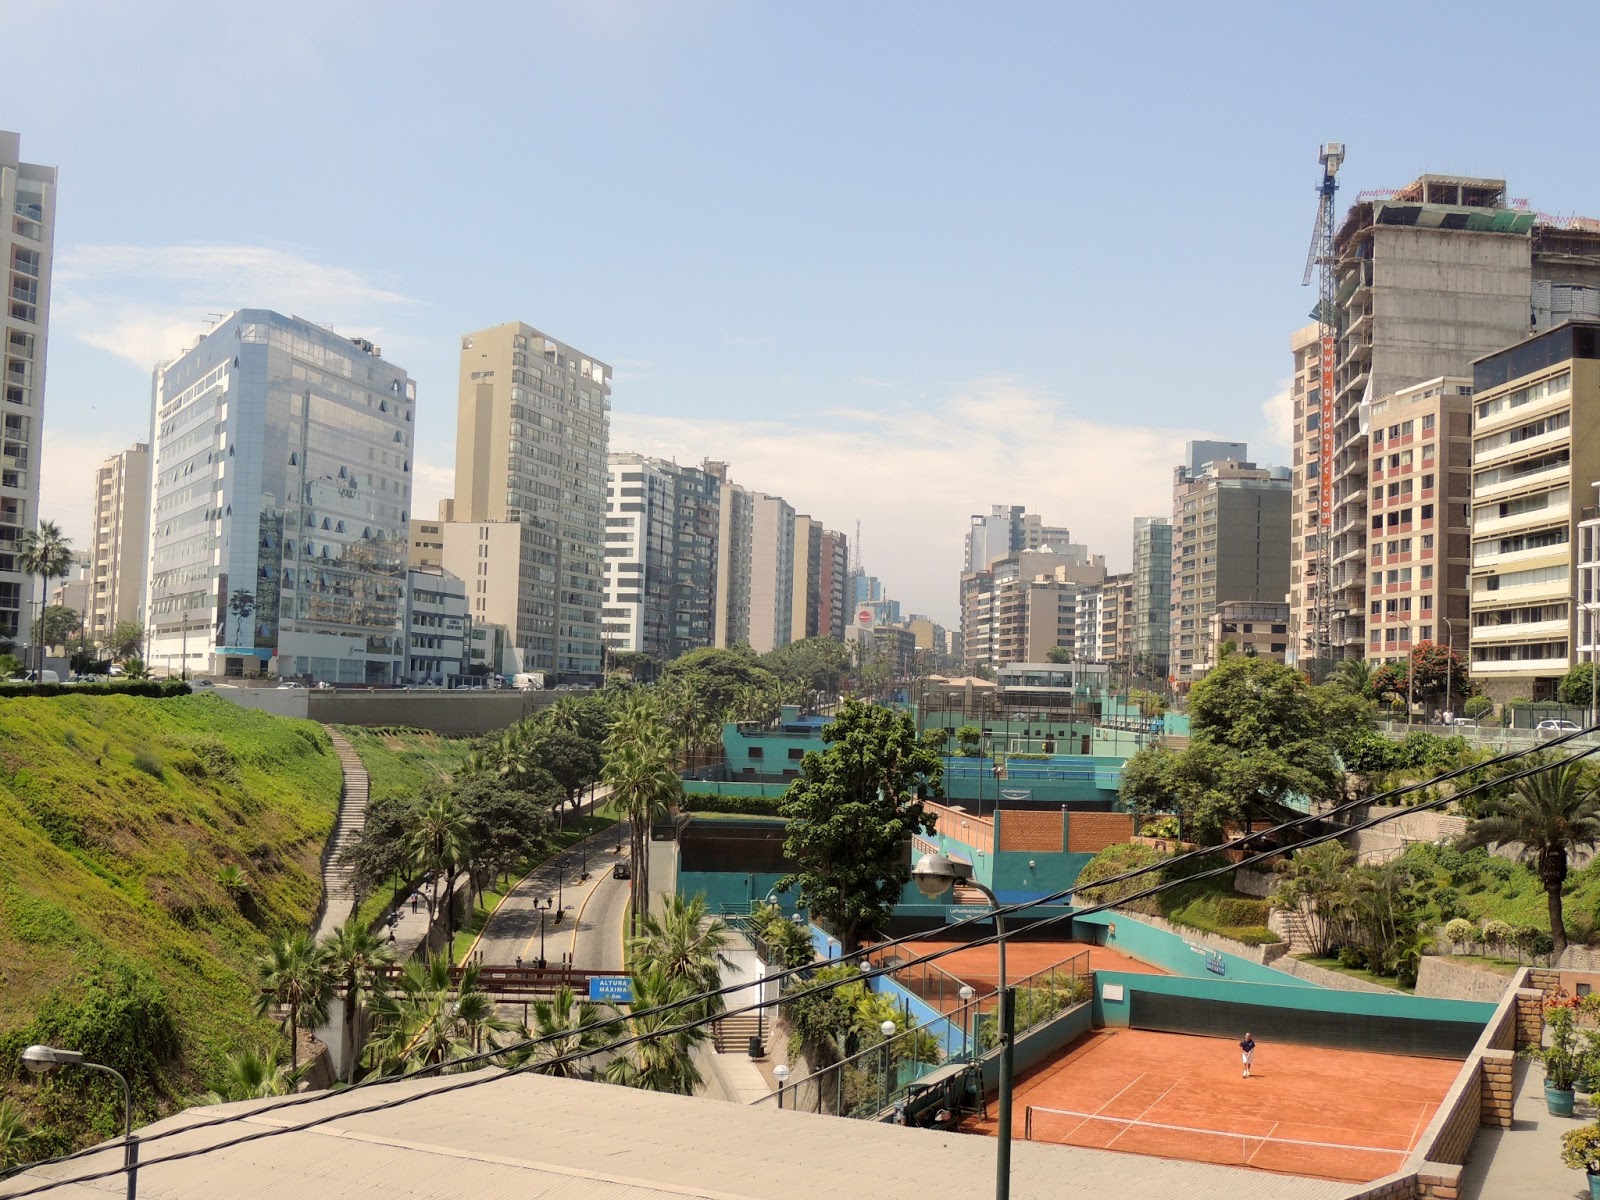 From Northern Ireland to Peru- Sharing God's Love: Lima- The capital of